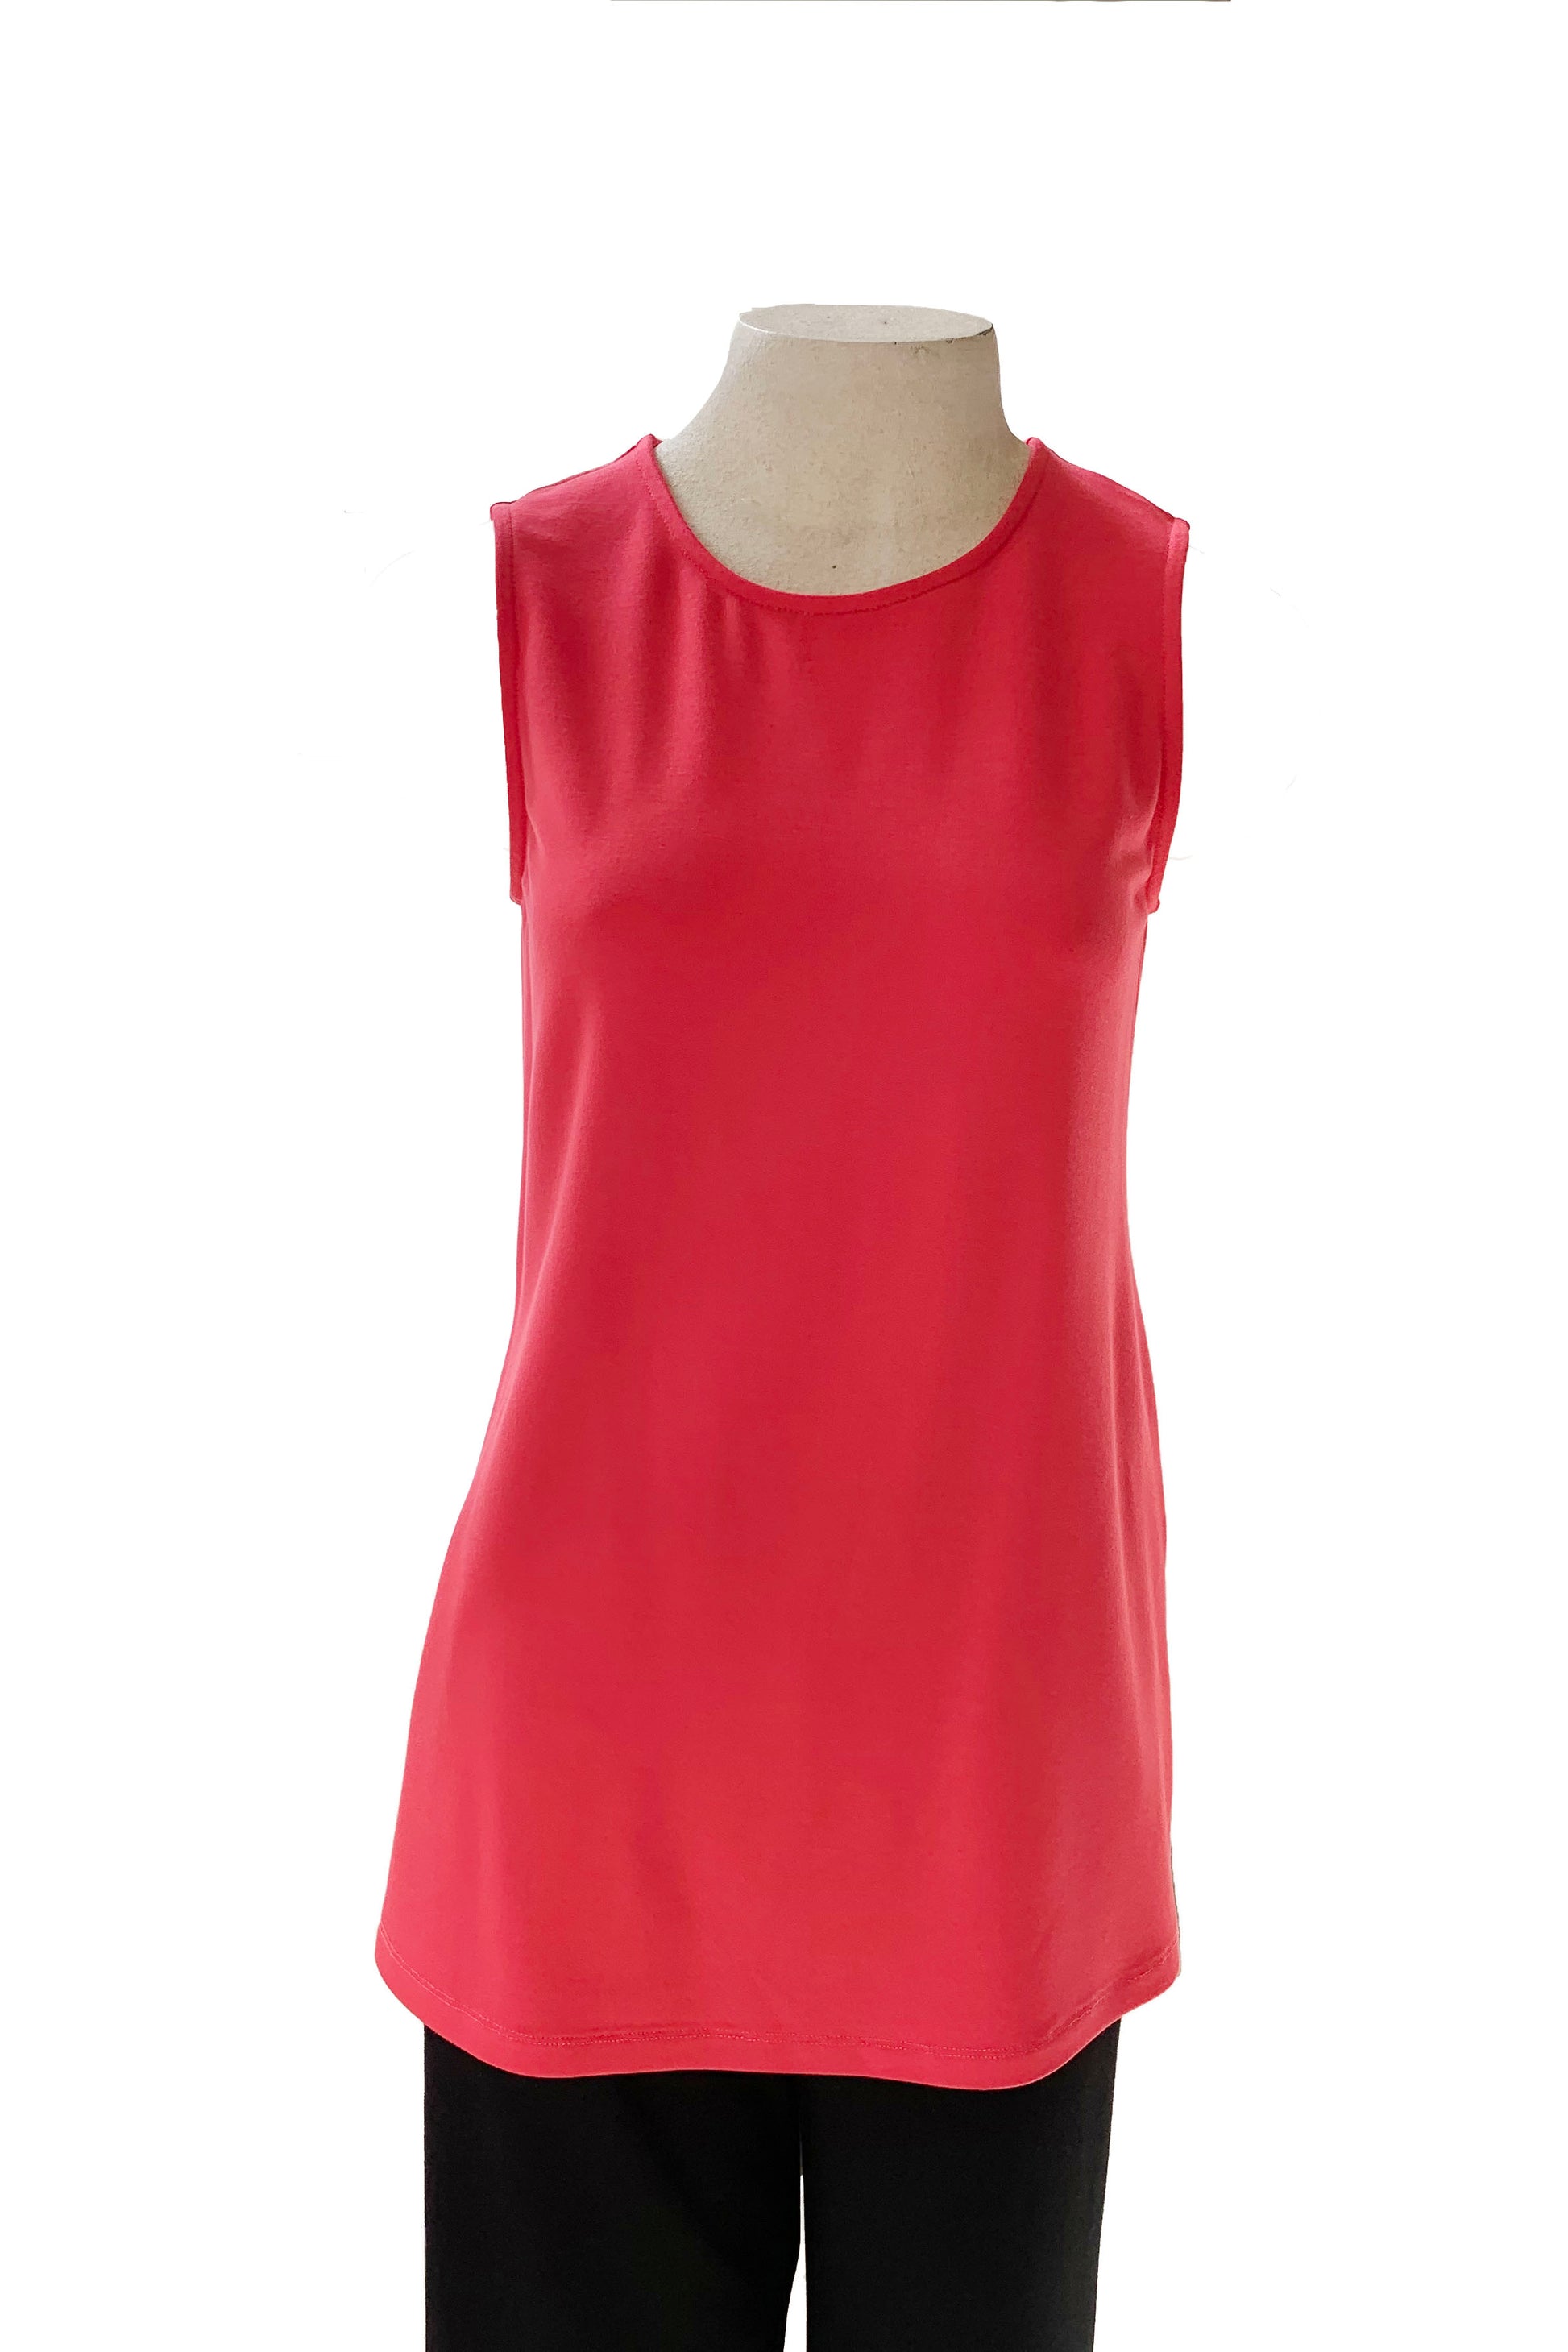 Miriam Tank Top by Compli K, Lipstick, wide straps, high and round neckline, below the hip length, eco-fabric, bamboo and viscose, sizes XS to XXL, made in Montreal 